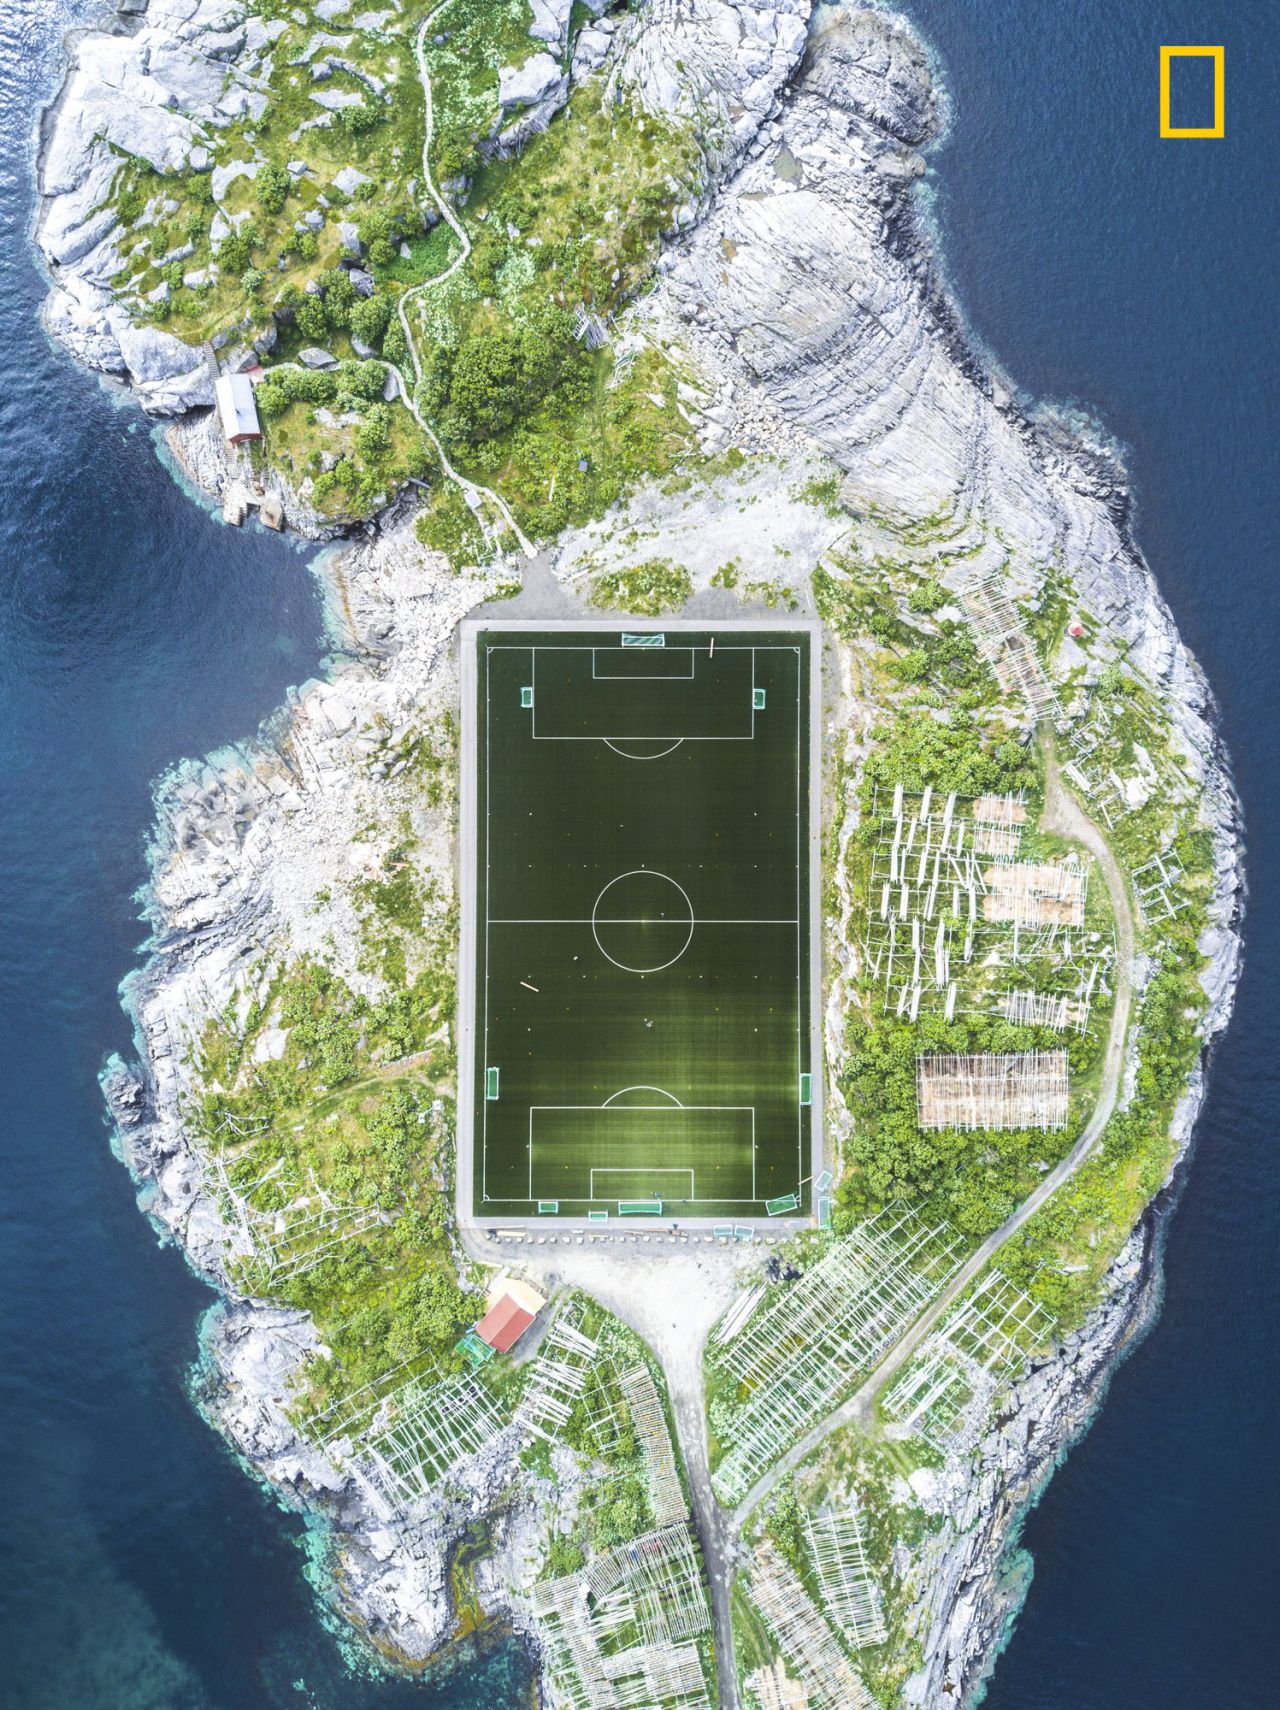 <strong>3rd Prize City Category -- "Henningsvær Football Field":</strong> The third prize winner in the city category of the <a href="http://travel.nationalgeographic.com/photographer-of-the-year-2017/" target="_blank" target="_blank">2017 National Geographic Travel Photographer of the Year Contest </a>is <a href="http://yourshot.nationalgeographic.com/profile/1392792/" target="_blank" target="_blank">Misha De-Stroyev</a>. De-Stroyev explains the story behind the drone image: "This football field in Henningsvær in the Lofoten Islands is considered one of the most amazing fields in Europe, and maybe even in the world. The photo was taken during a 10-day sailing trip in Norway in June 2017. We arrived to Henningsvær after a week of sailing through the cold and rainy weather. Upon our arrival, the weather cleared up. I was really lucky that the conditions were suitable for flying my drone, and I managed to capture this shot from a height of 120 meters."